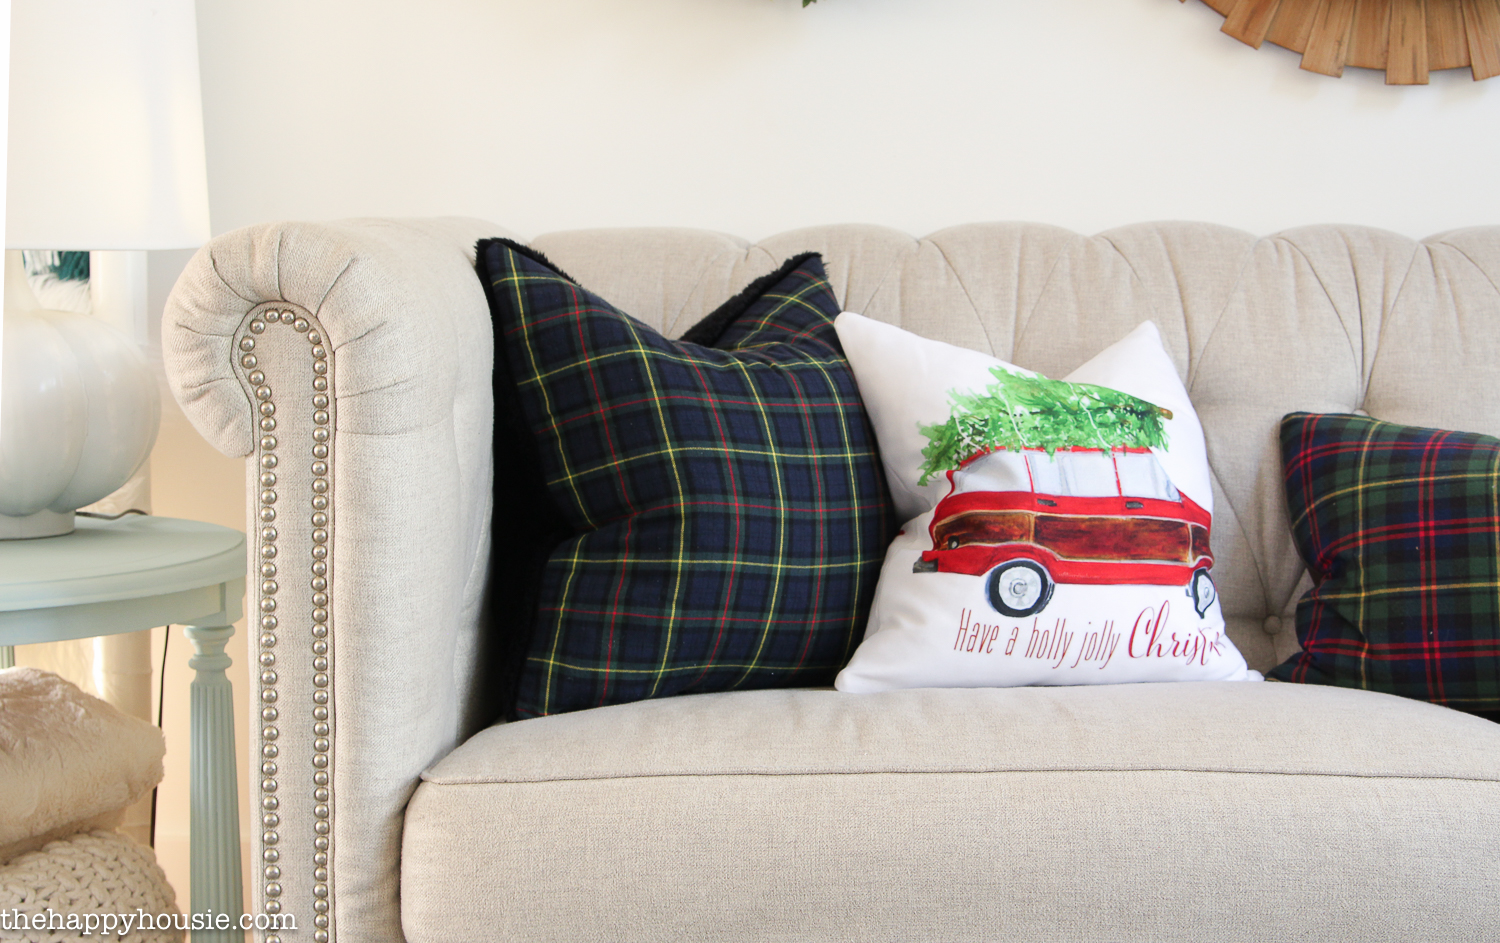 Seasonal pillows are on the couch.